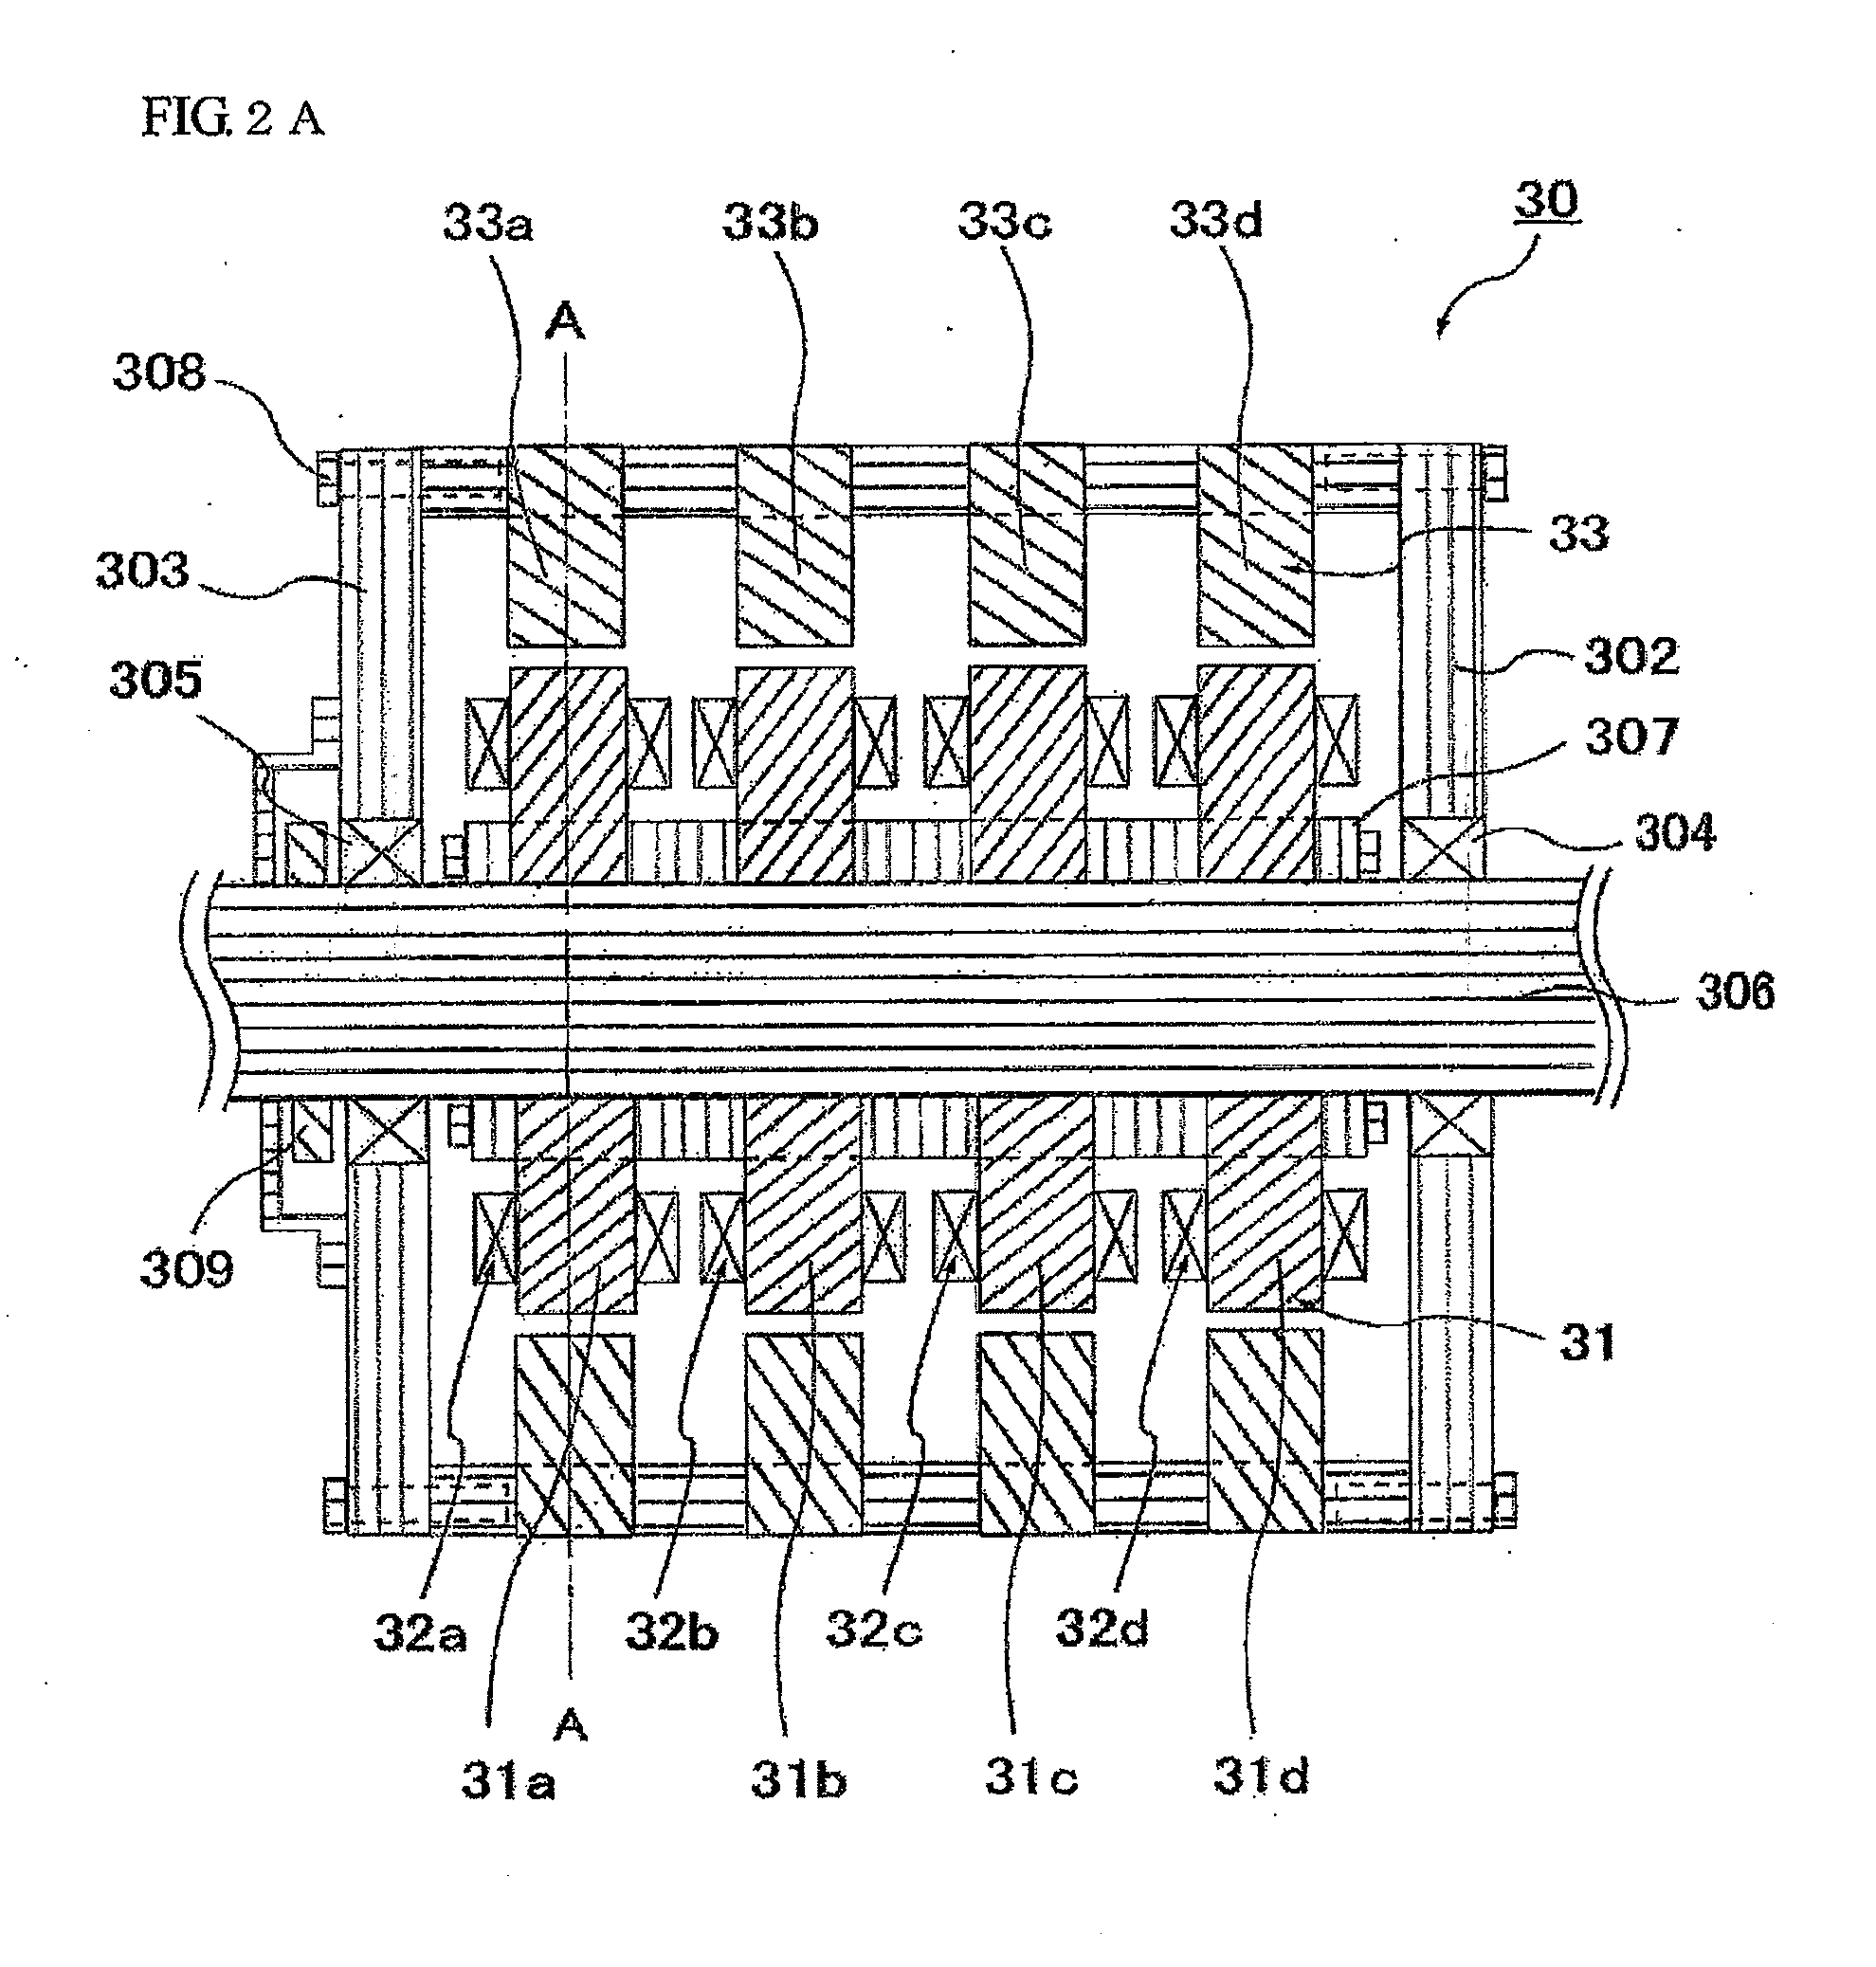 Switched Reluctance Motor and Switched Reluctance Motor Drive System